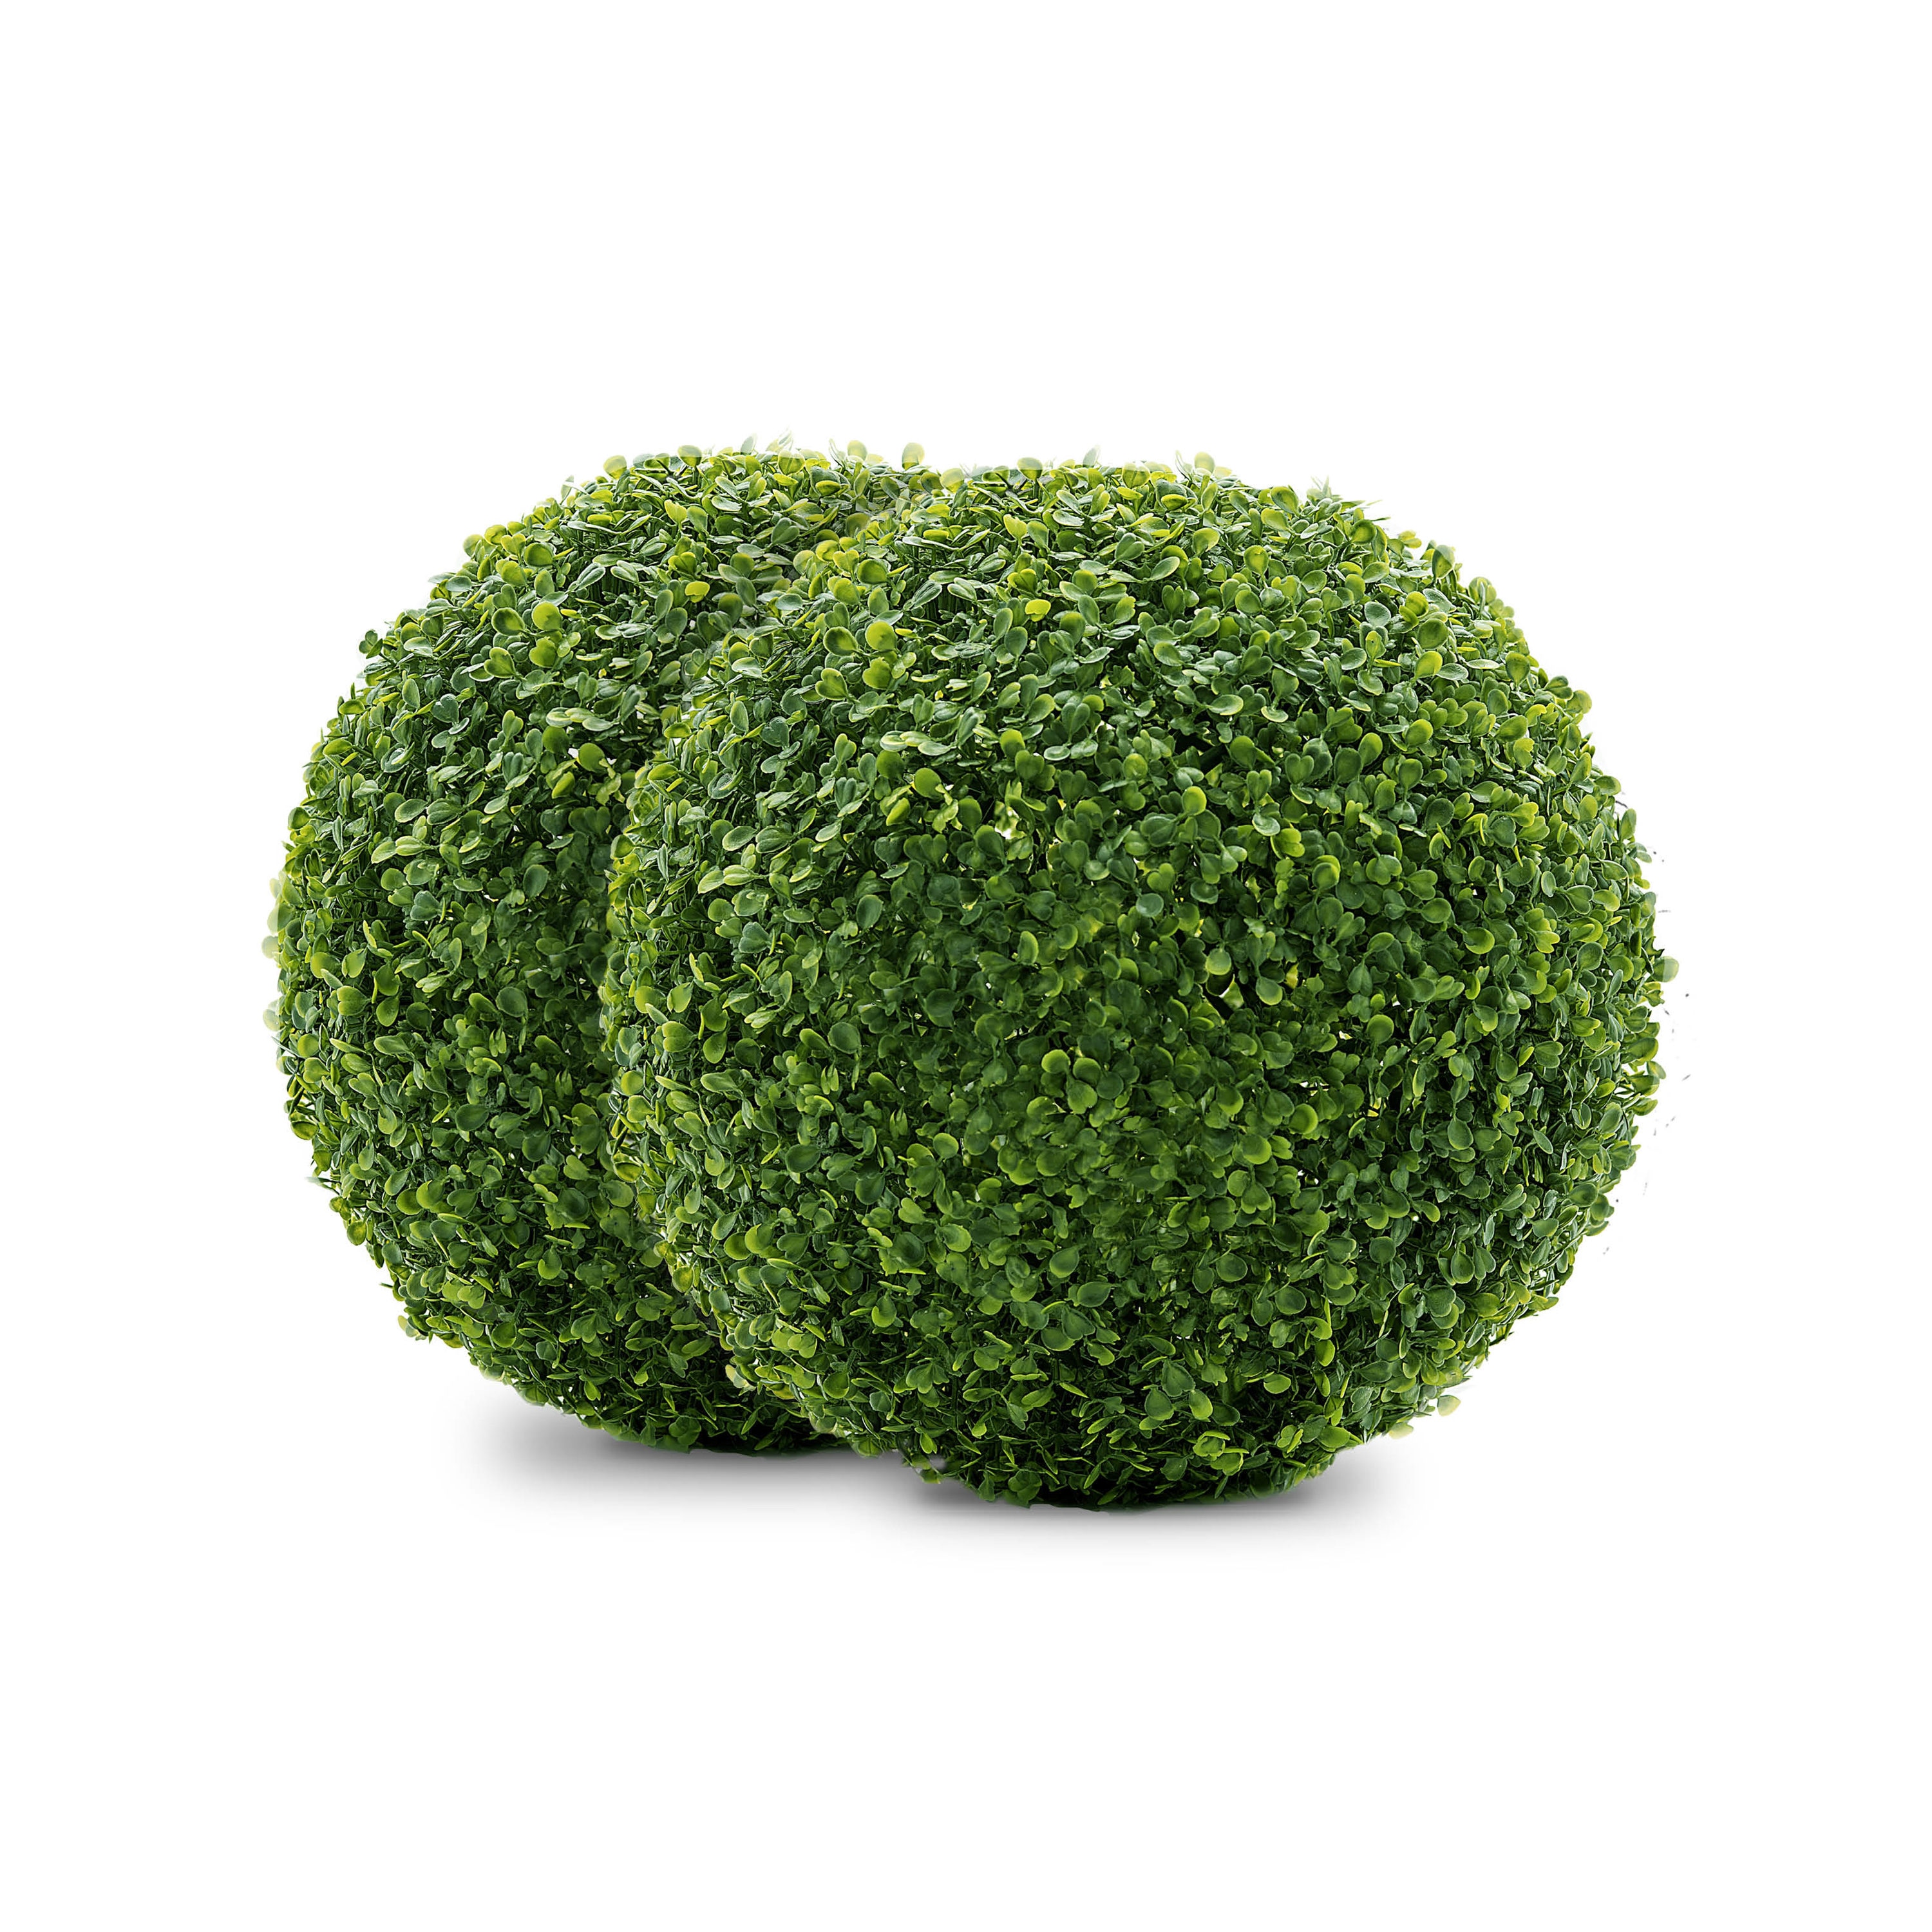 Filler Greenery Balls Large Outdoor Ornaments Faux Topiary Balls Wedding  Decor Simulated Milano Ball Leaves Boxwood Sphere